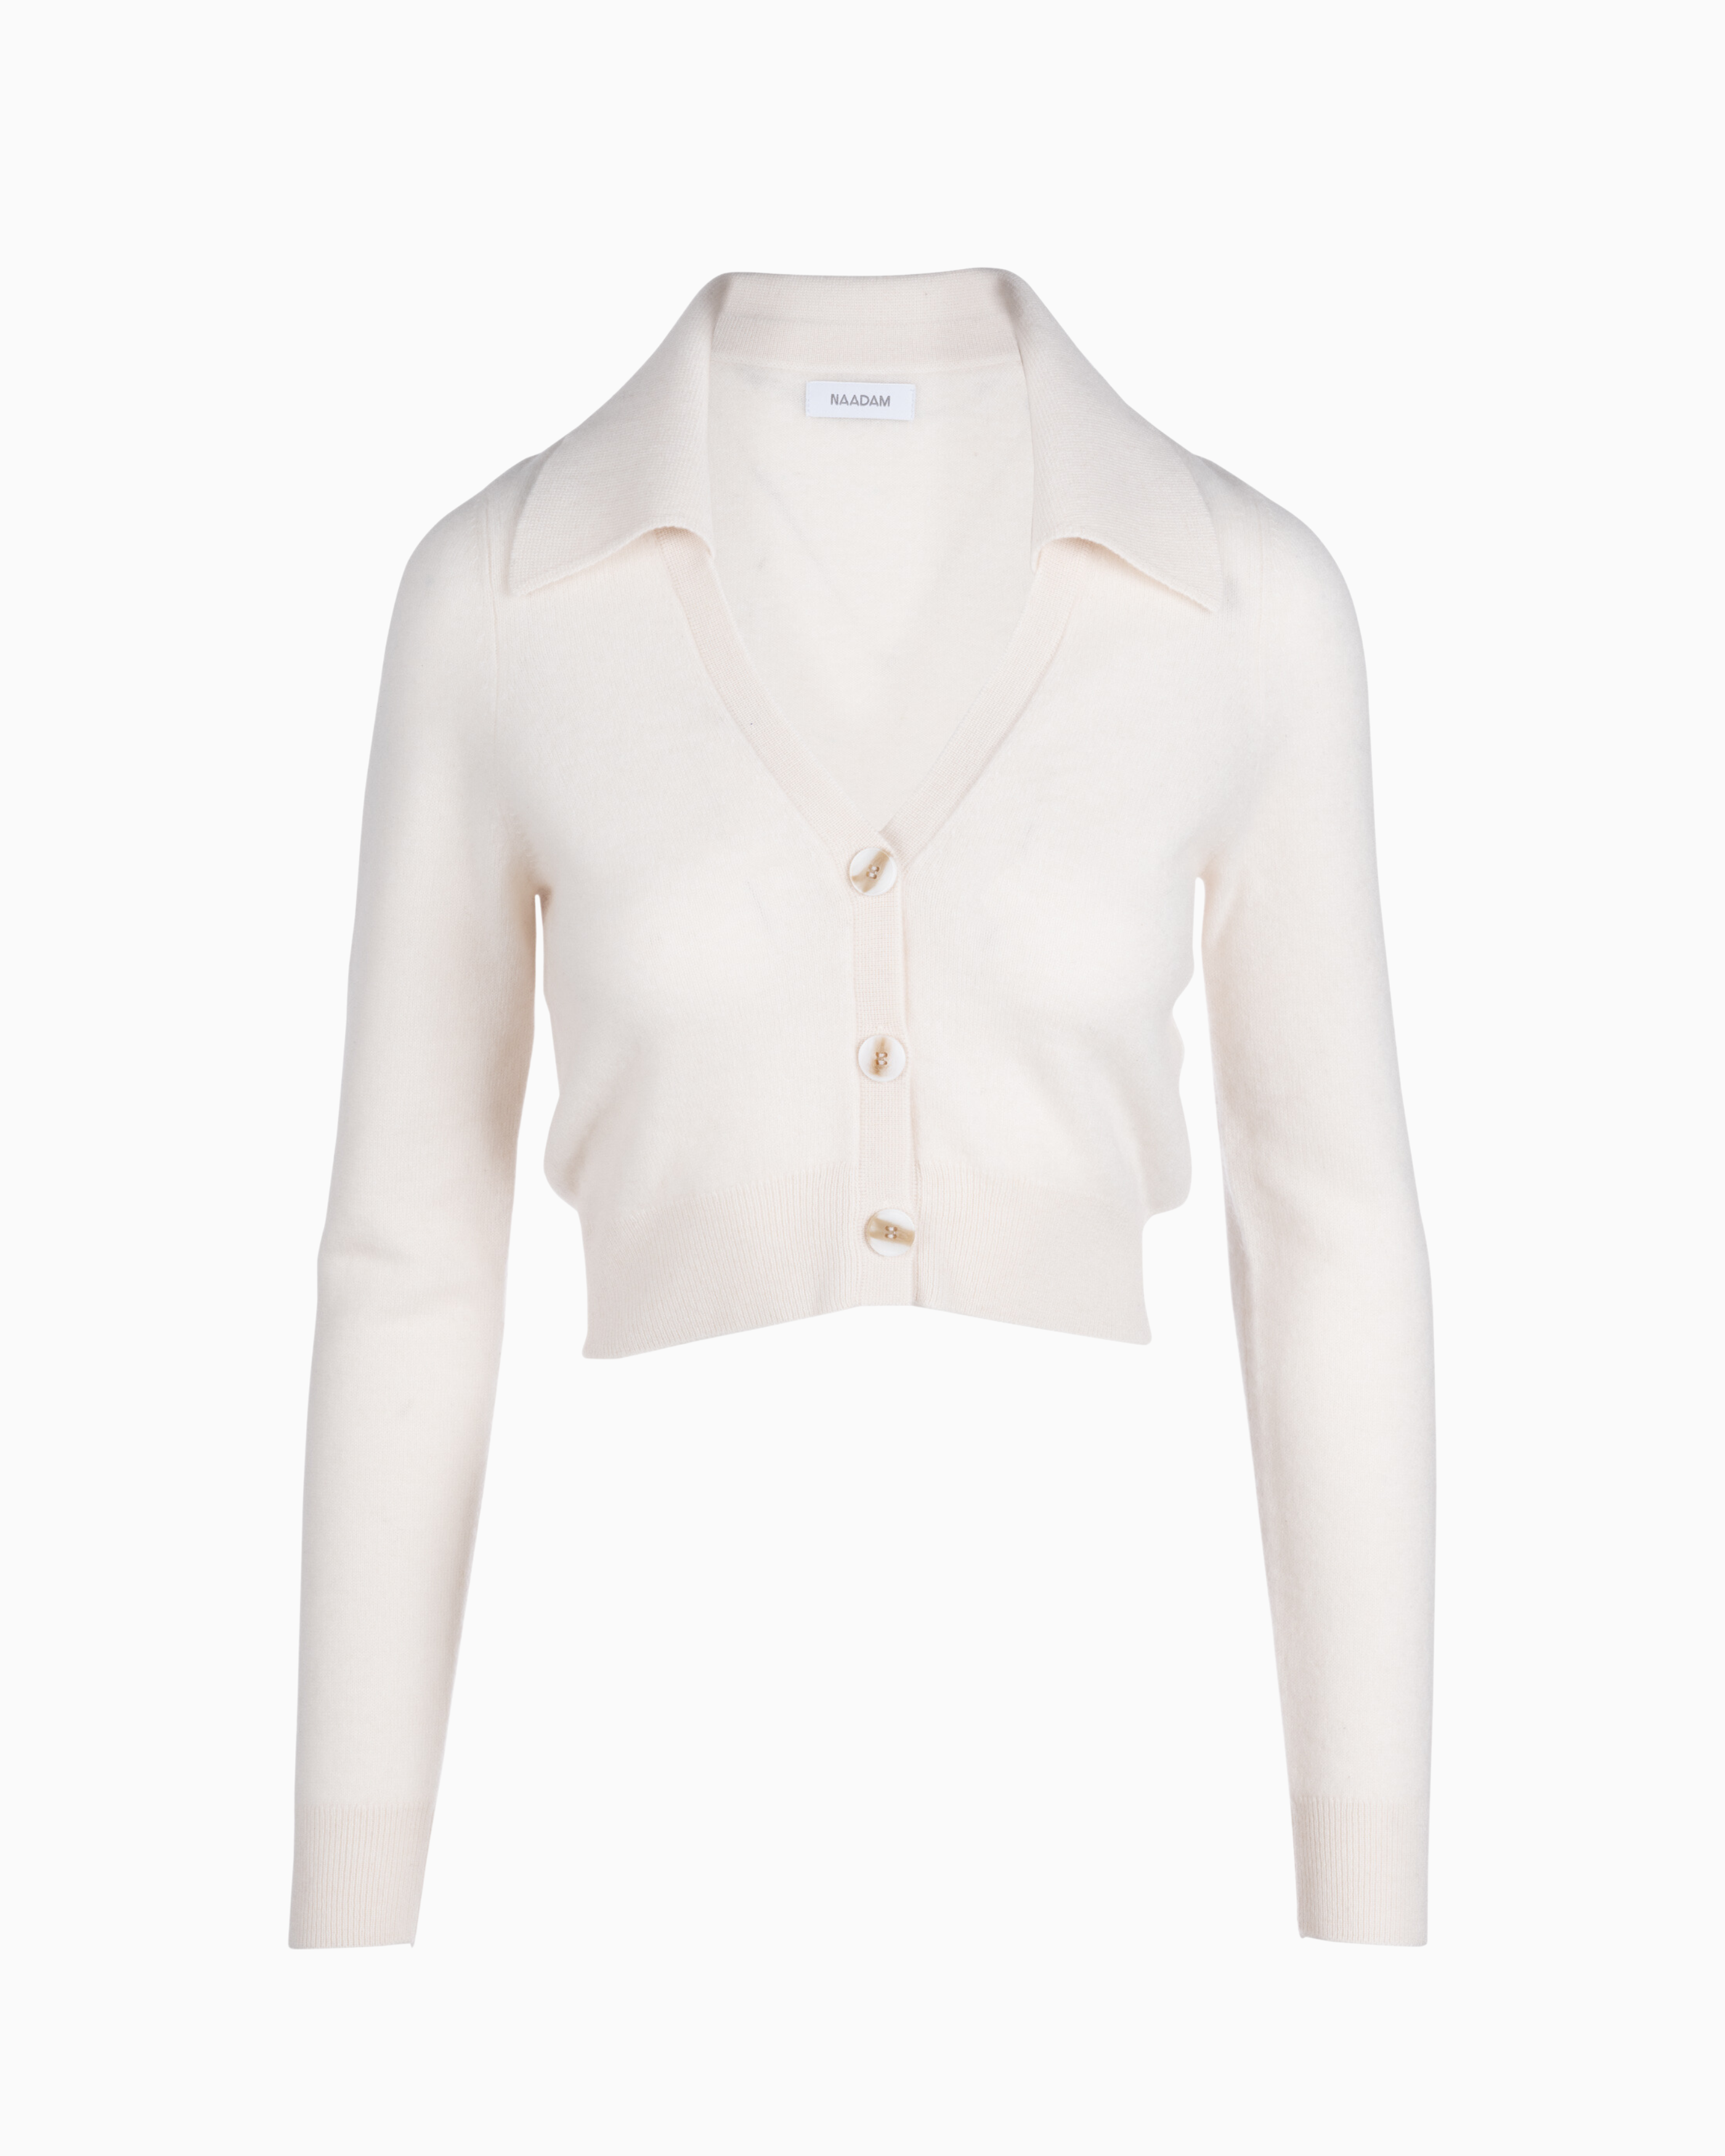 Naadam Cropped Polo Cardigan in White